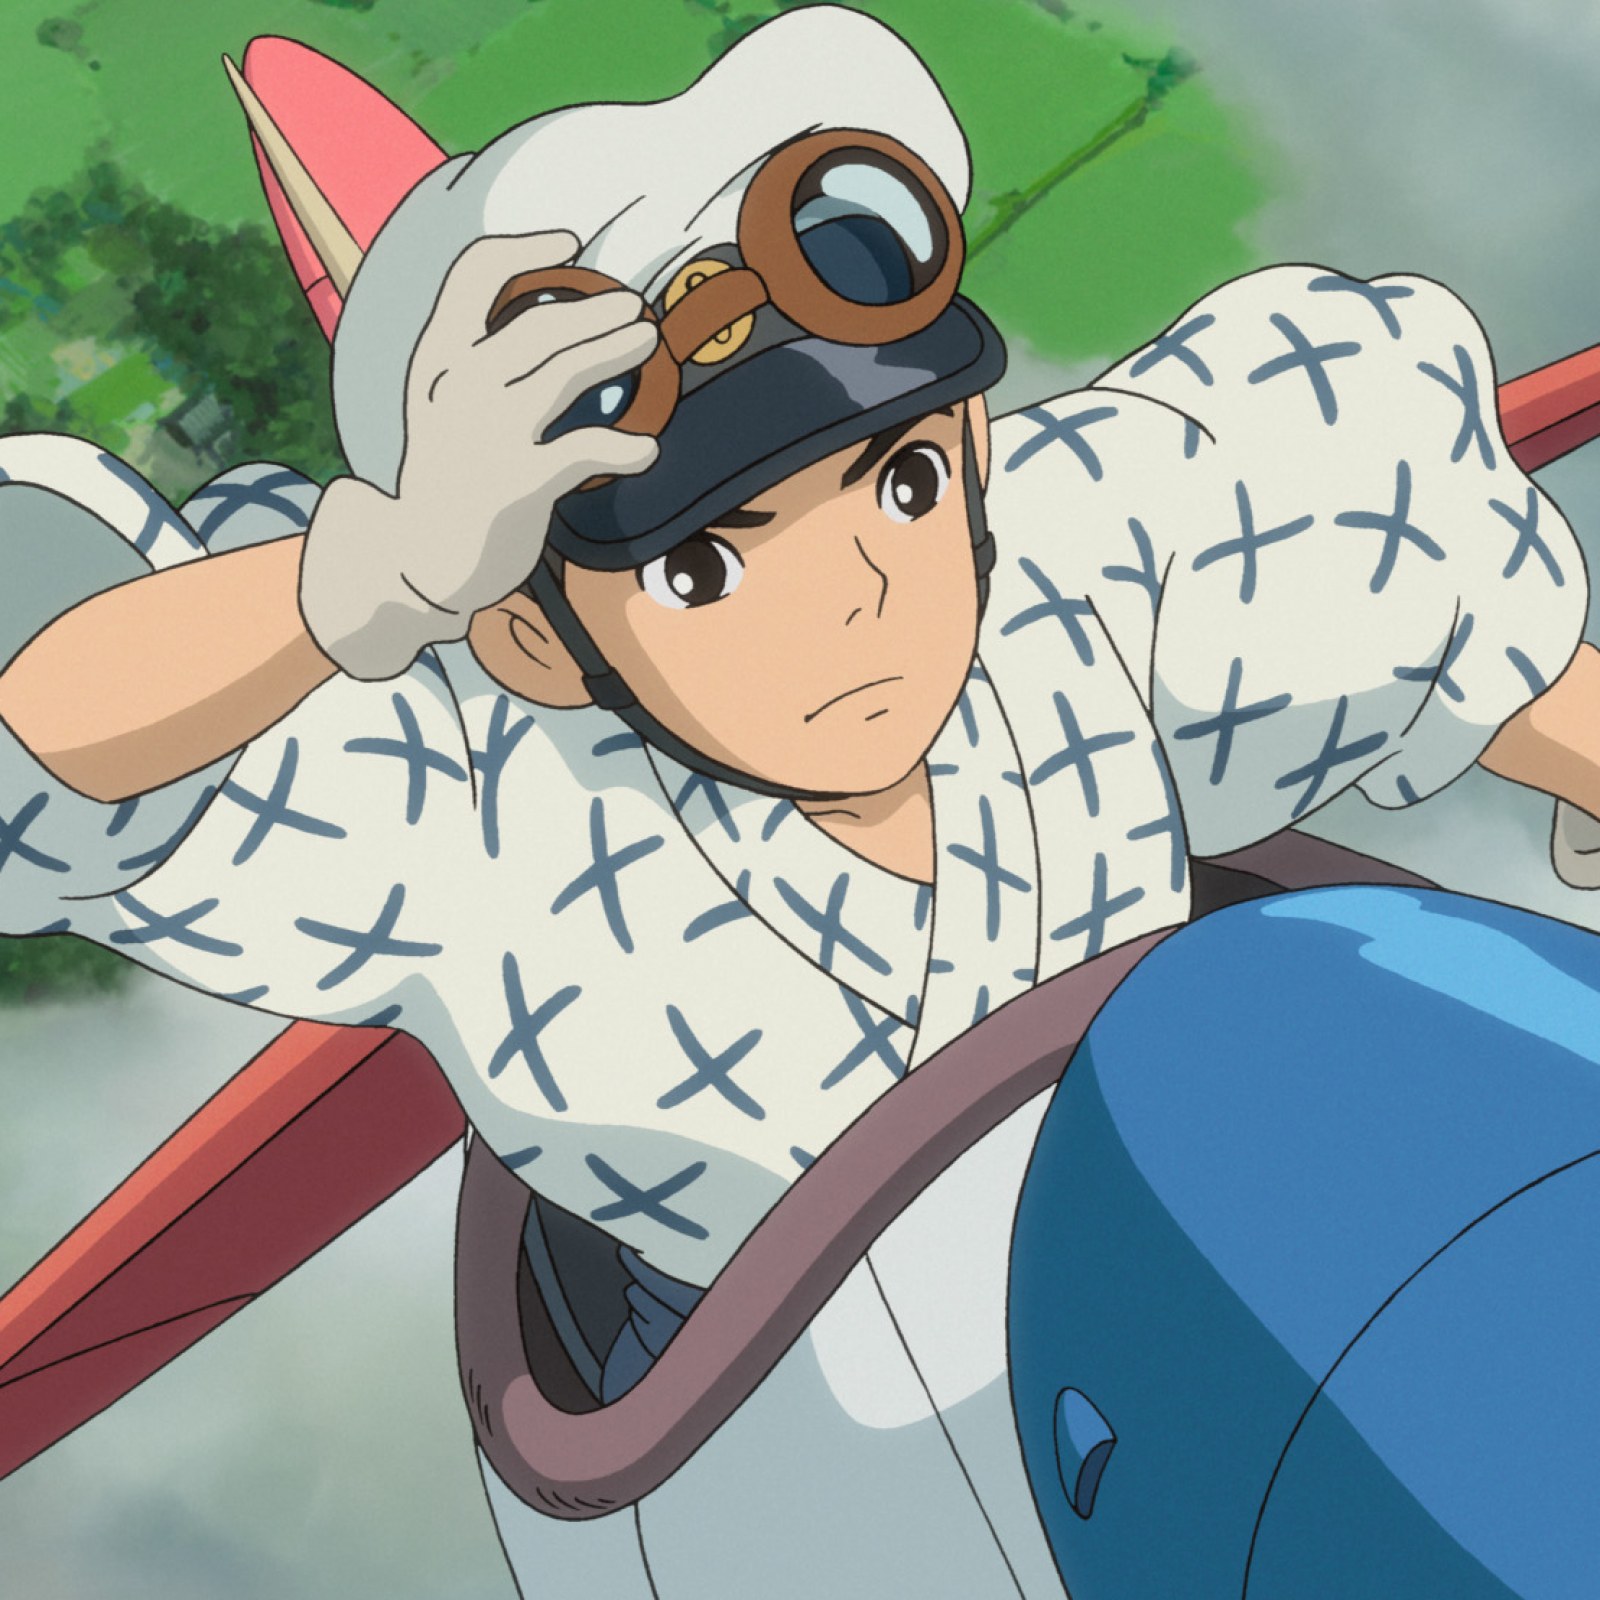 10 Highest-Grossing Studio Ghibli Movies of All Time, Ranked